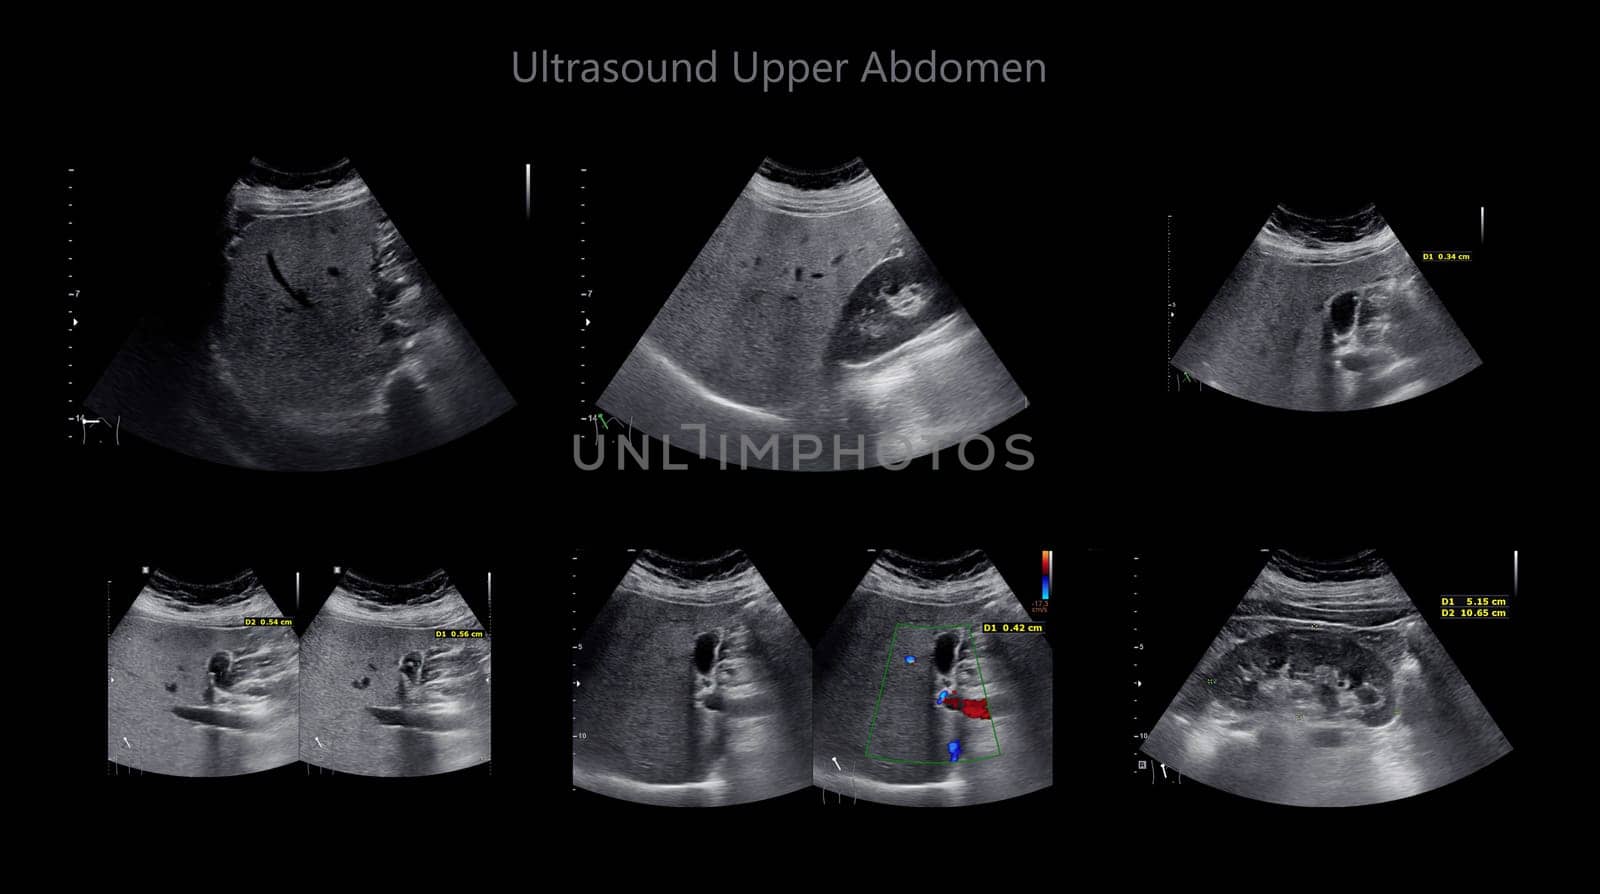 Ultrasound upper abdomen showing  Liver and gall bladder for screening hepatic cell carcinoma and gallstone. by samunella